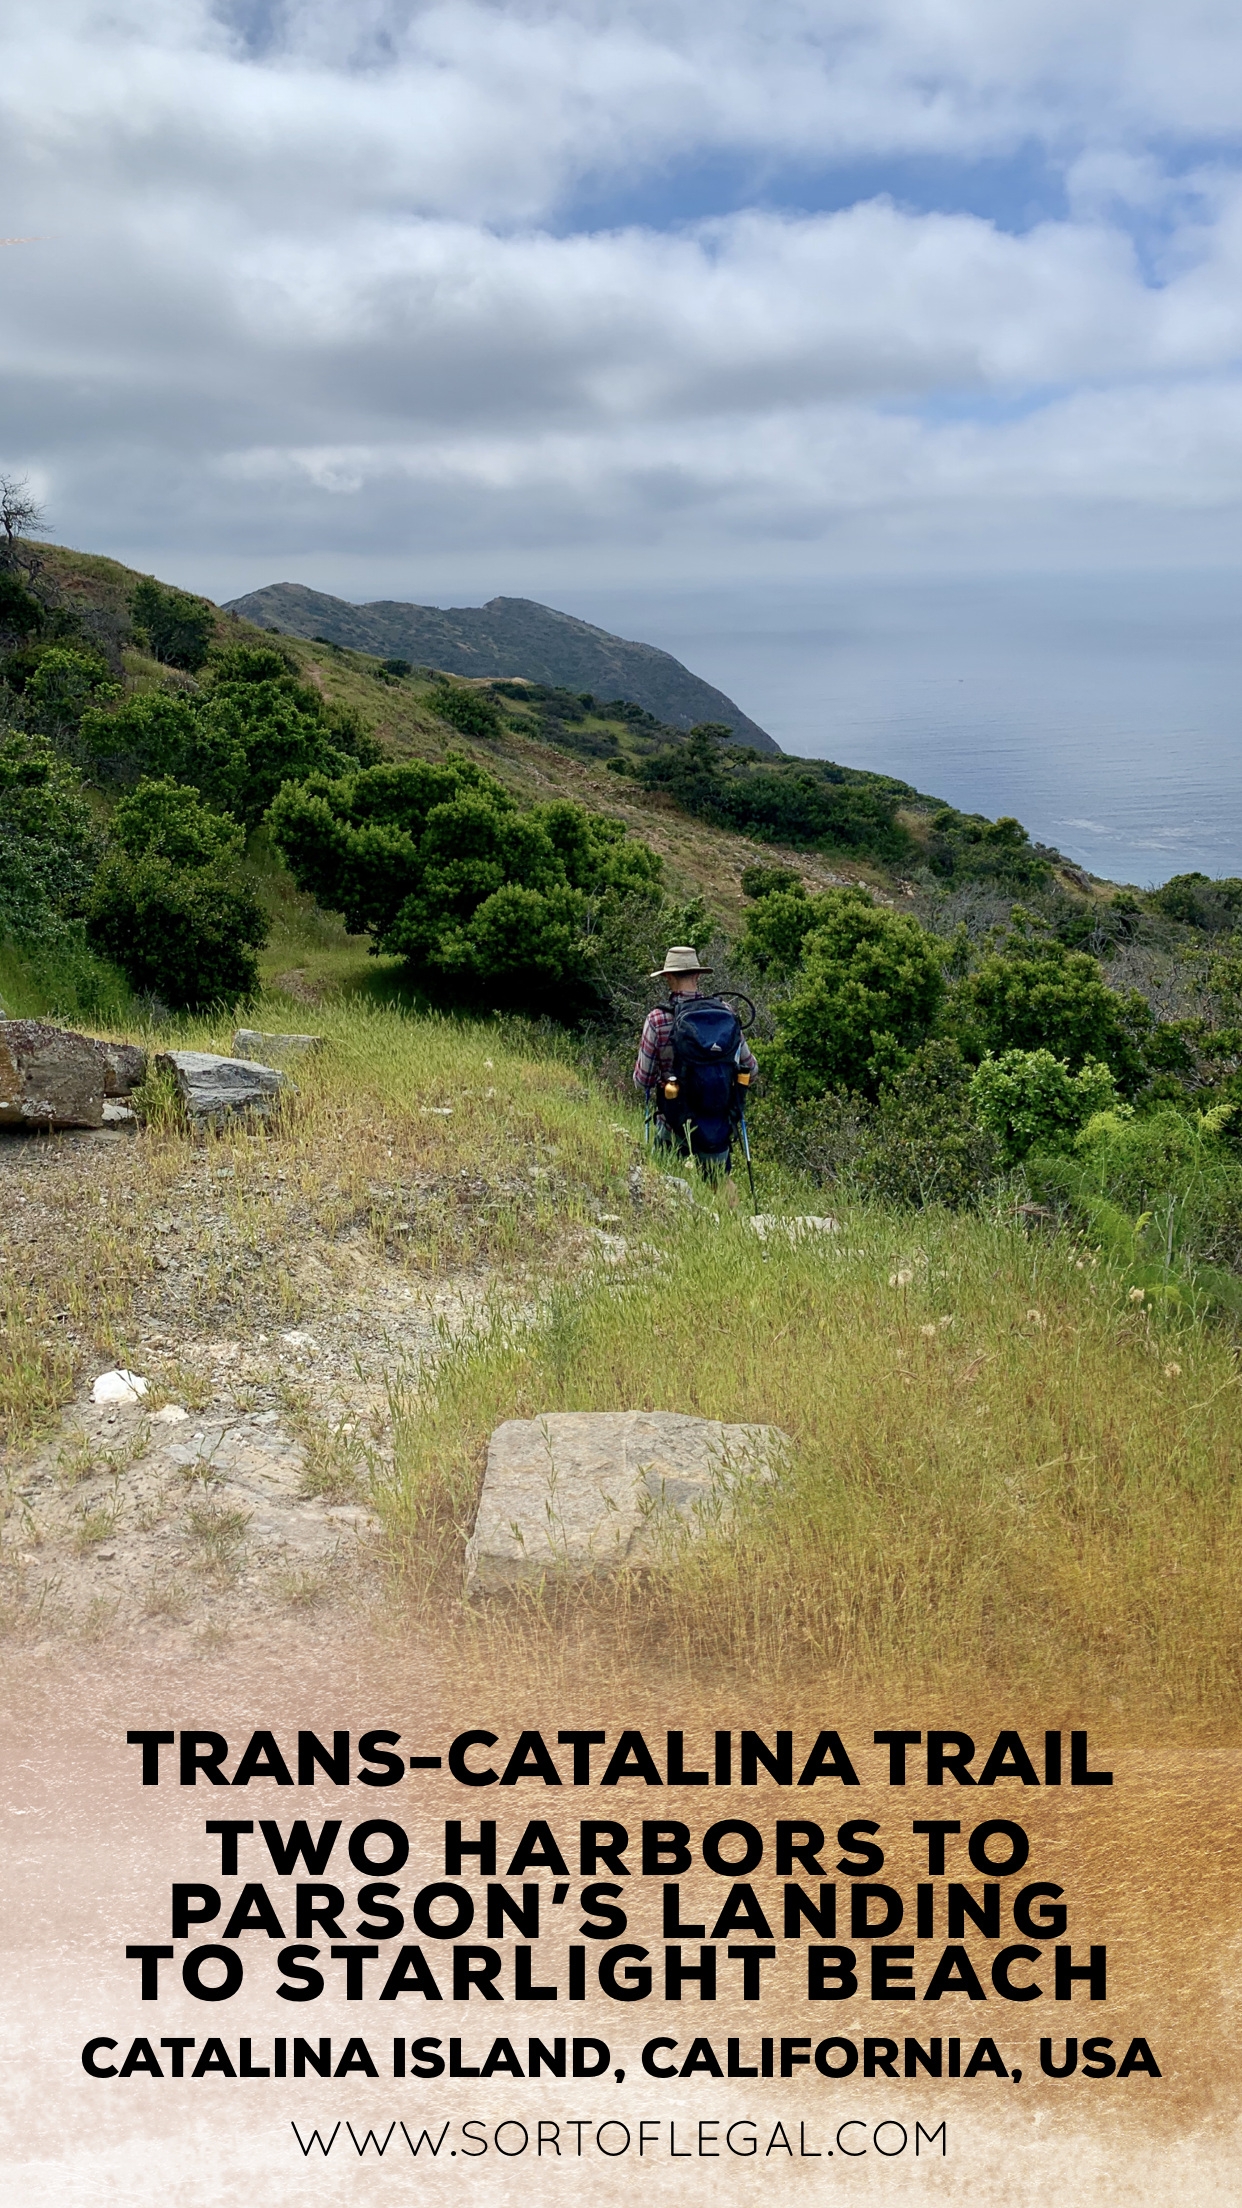 Hiking or Backpacking the Trans-Catalina Trail: Two Harbors to Parson’s Landing to Starlight Beach